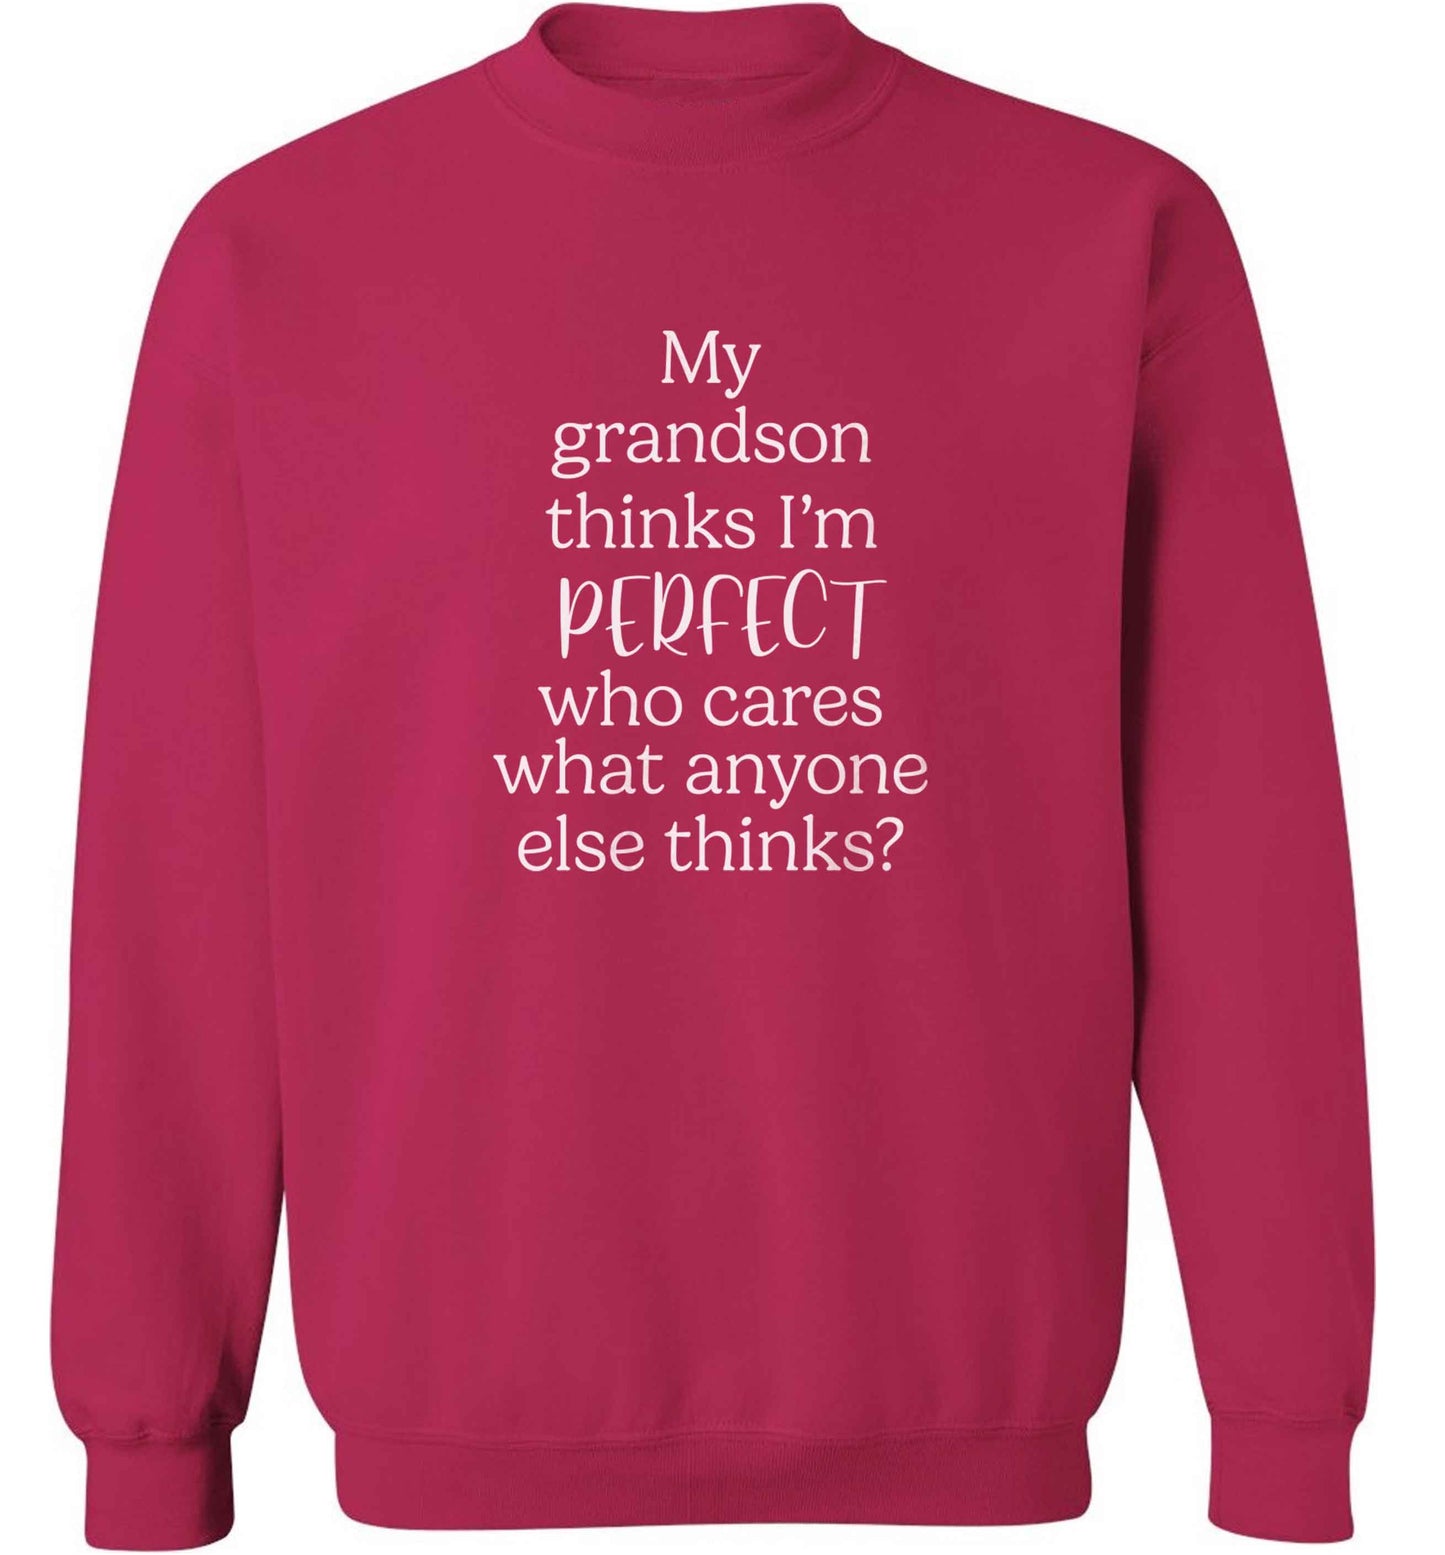 My grandson thinks I'm perfect adult's unisex pink sweater 2XL